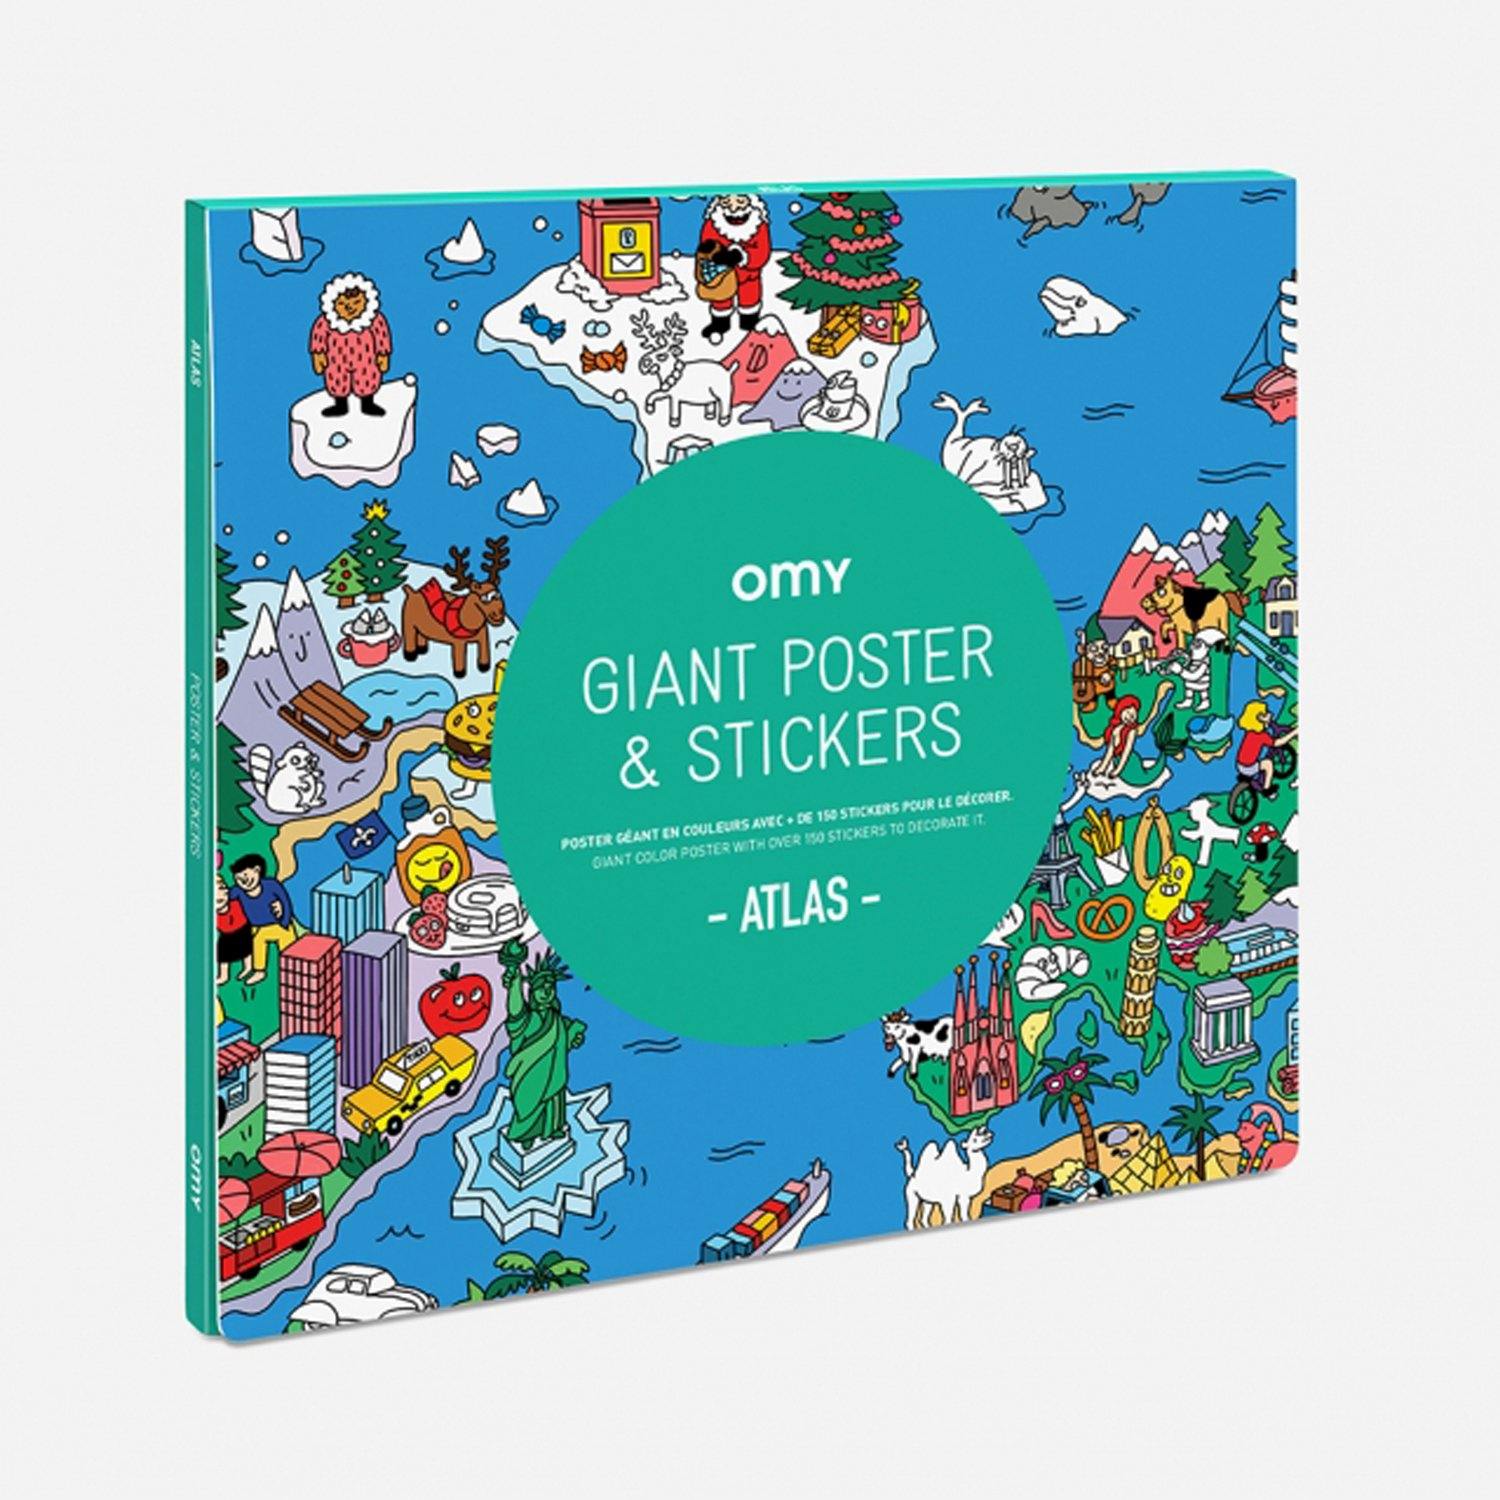 ATLAS - Giant Poster with Stickers - BLU KAT